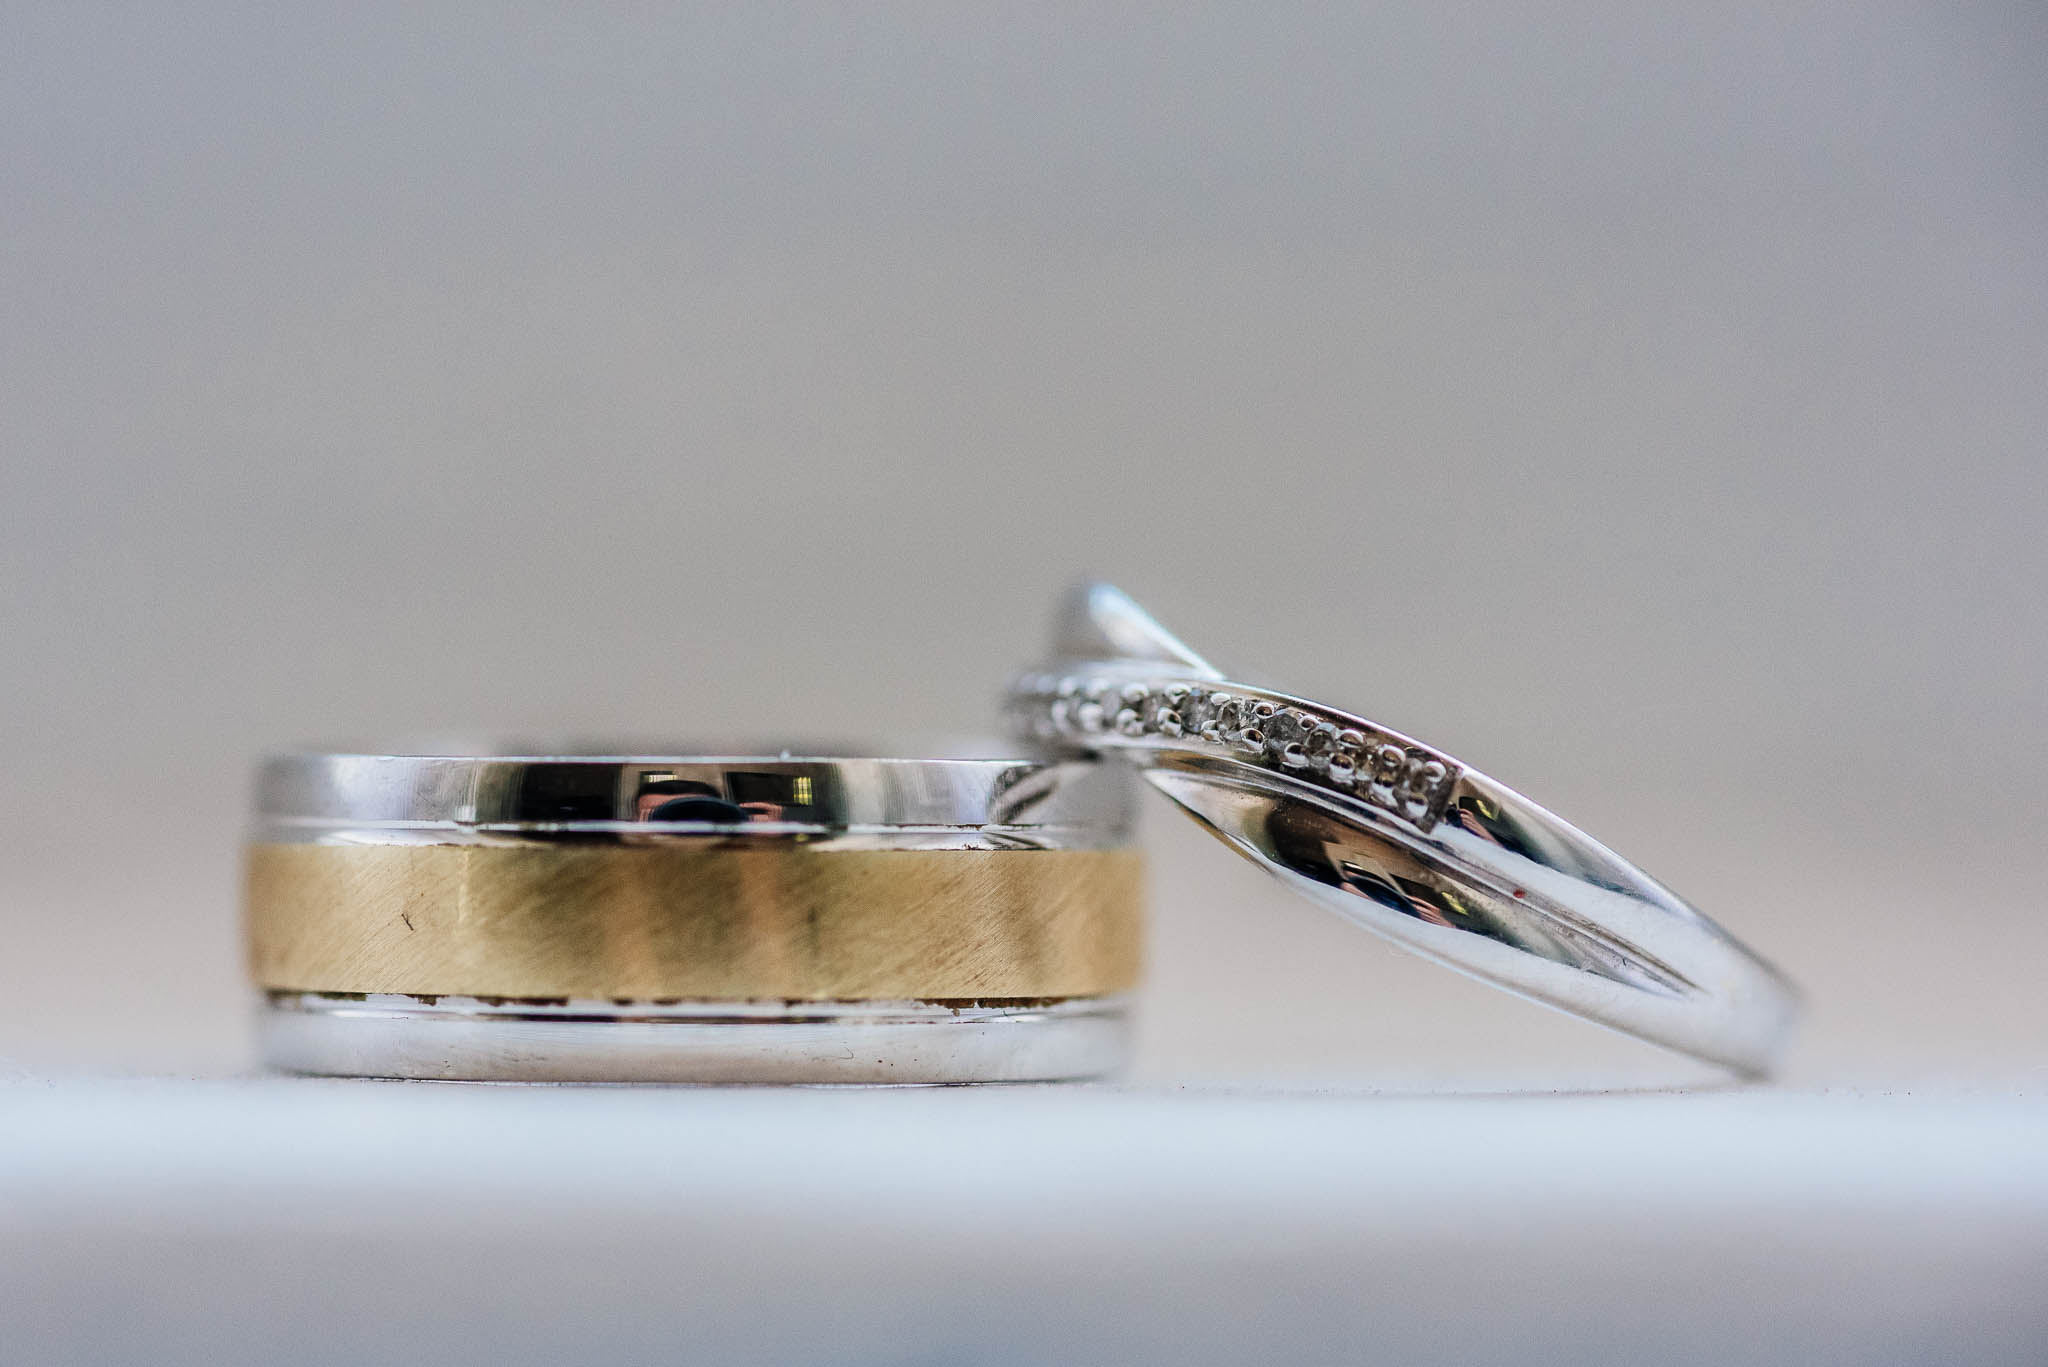 A beautifully captured close-up image of two wedding rings, showcasing the intricate details and textures of the rings. The rings are resting on a neutral, blurred background that highlights their beauty and symbolizes the unity and everlasting love they represent.